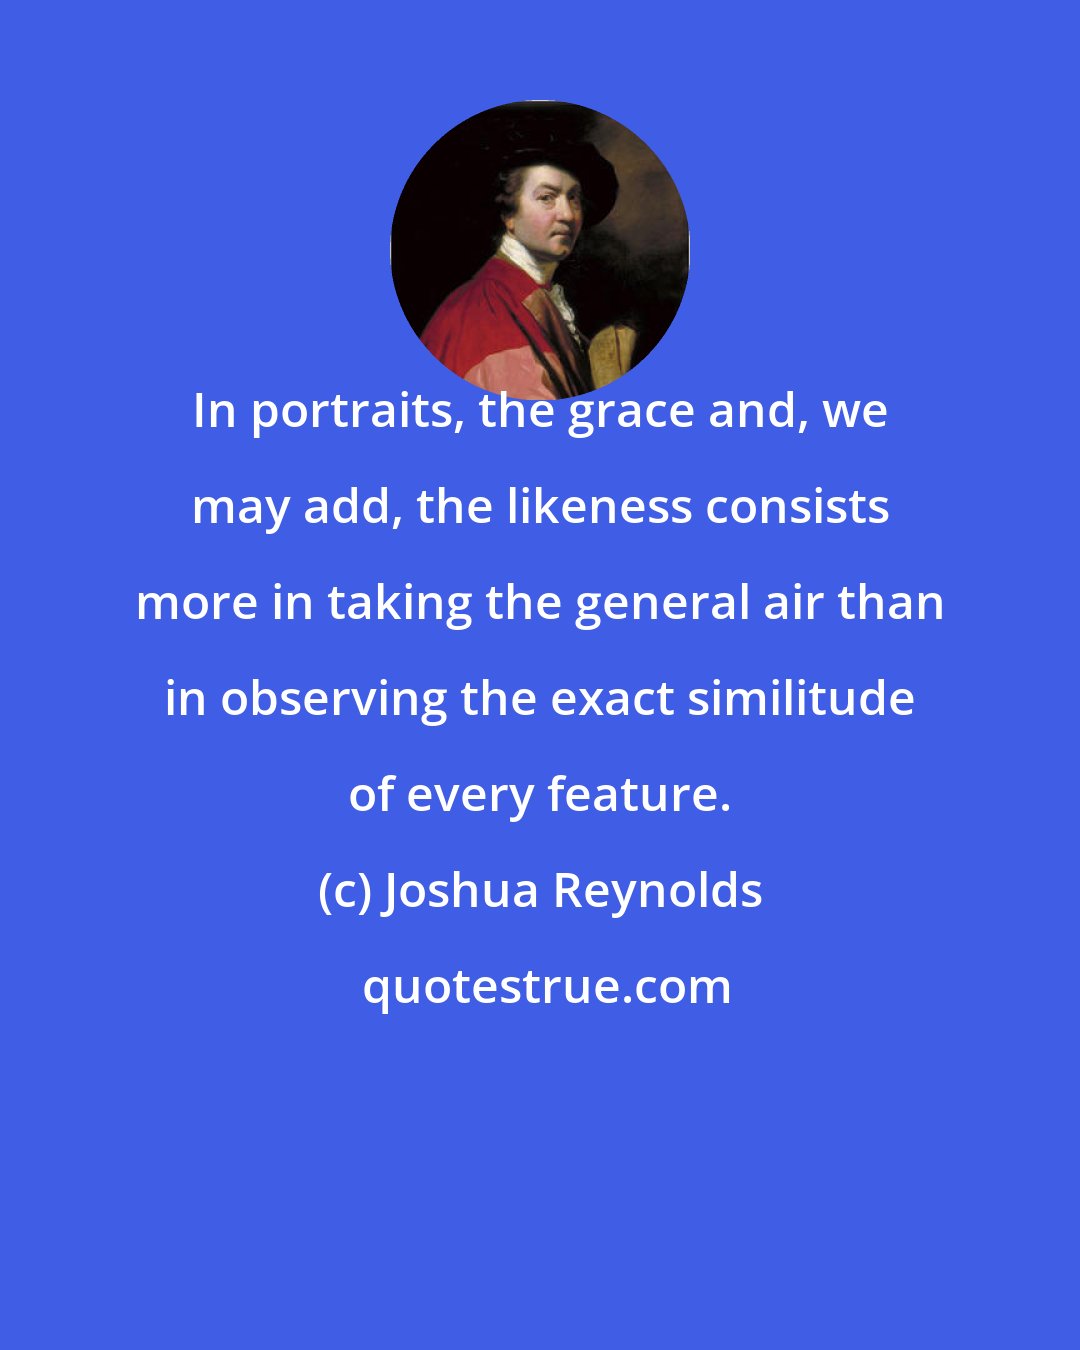 Joshua Reynolds: In portraits, the grace and, we may add, the likeness consists more in taking the general air than in observing the exact similitude of every feature.